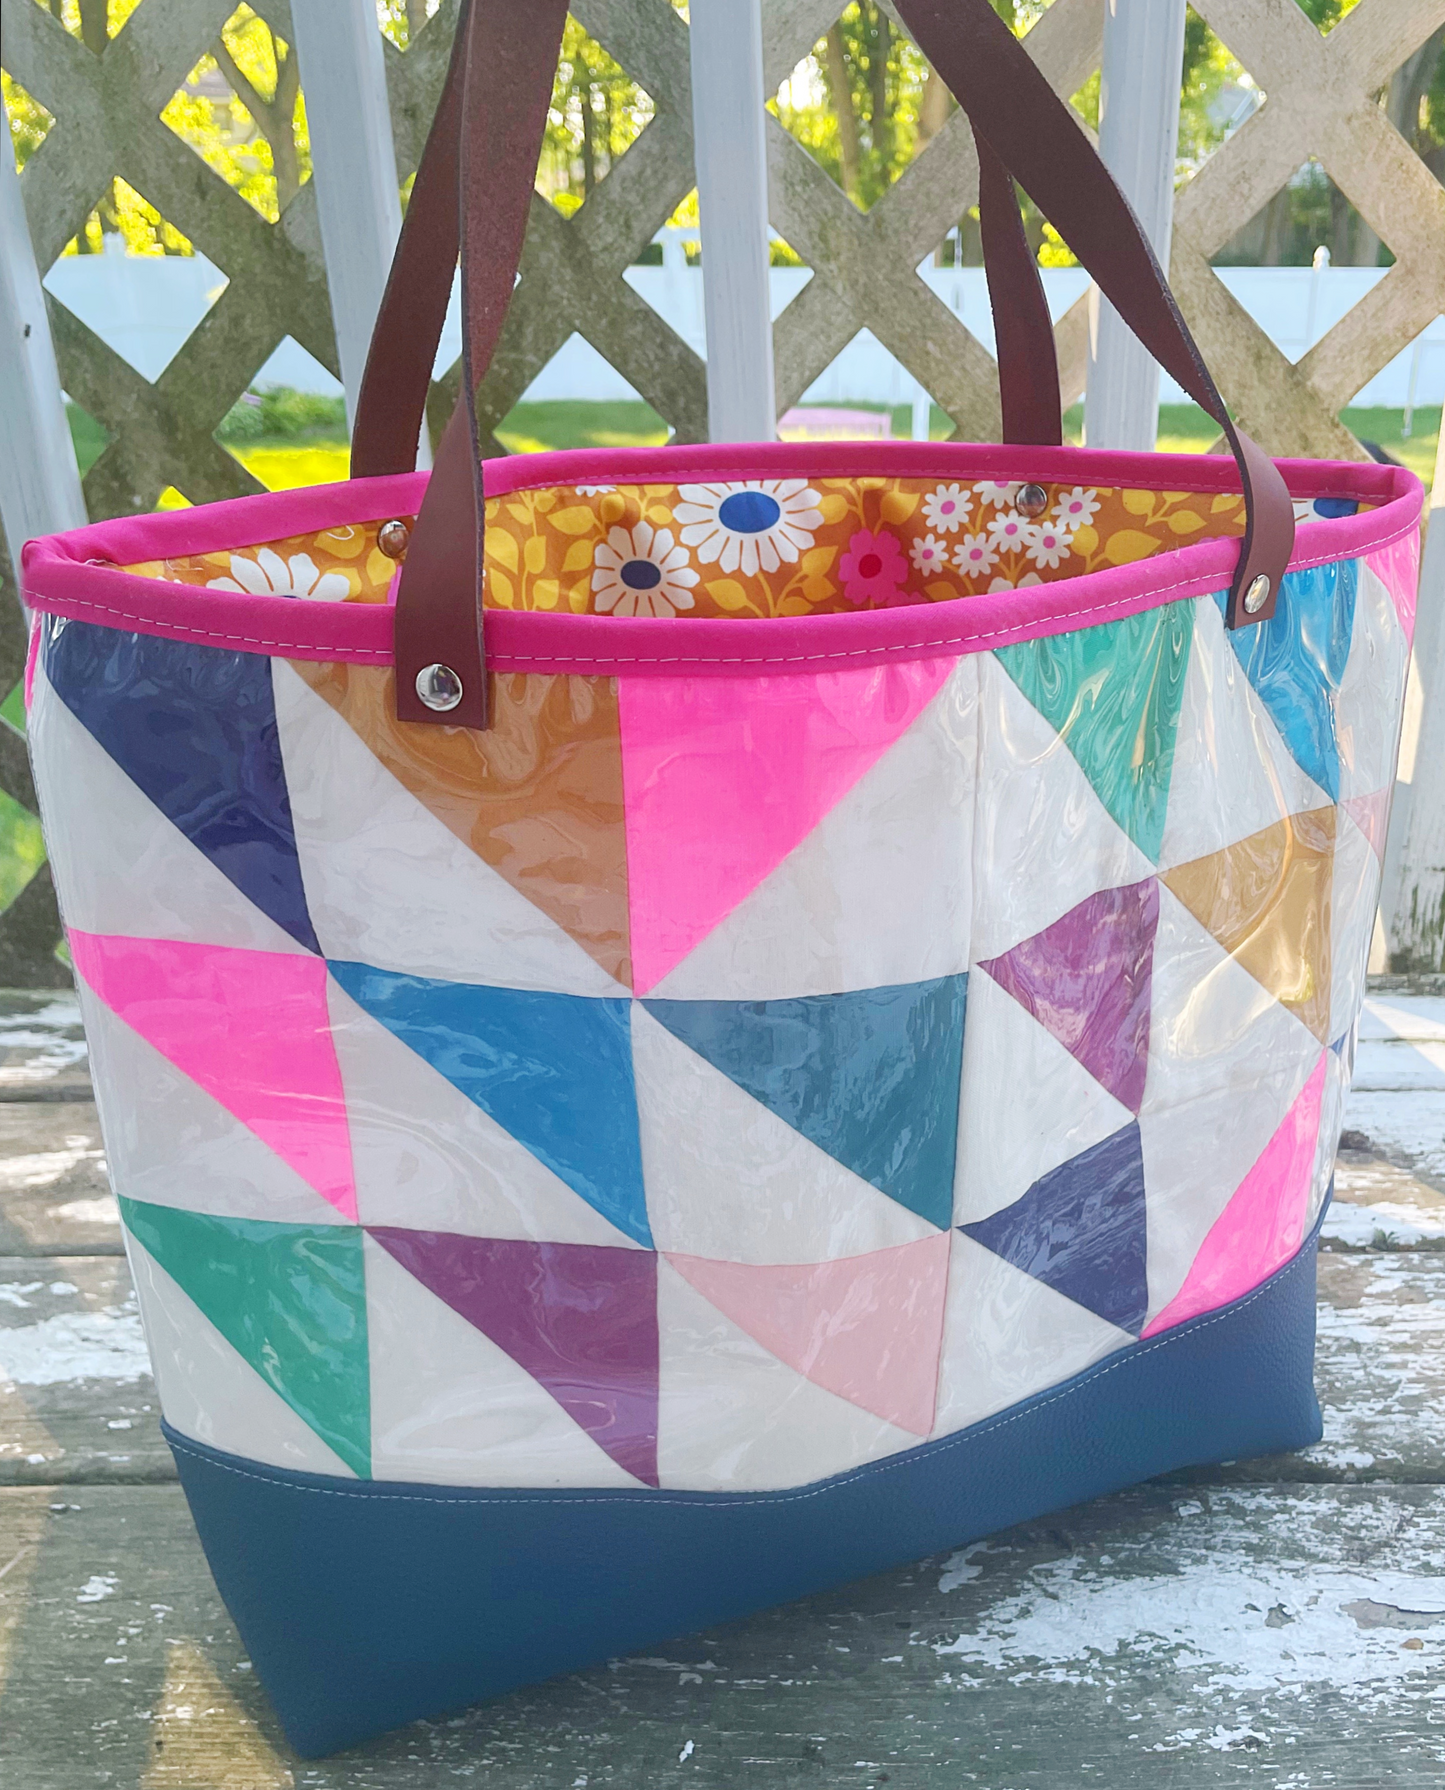 HST Quilt & tote sewing pattern